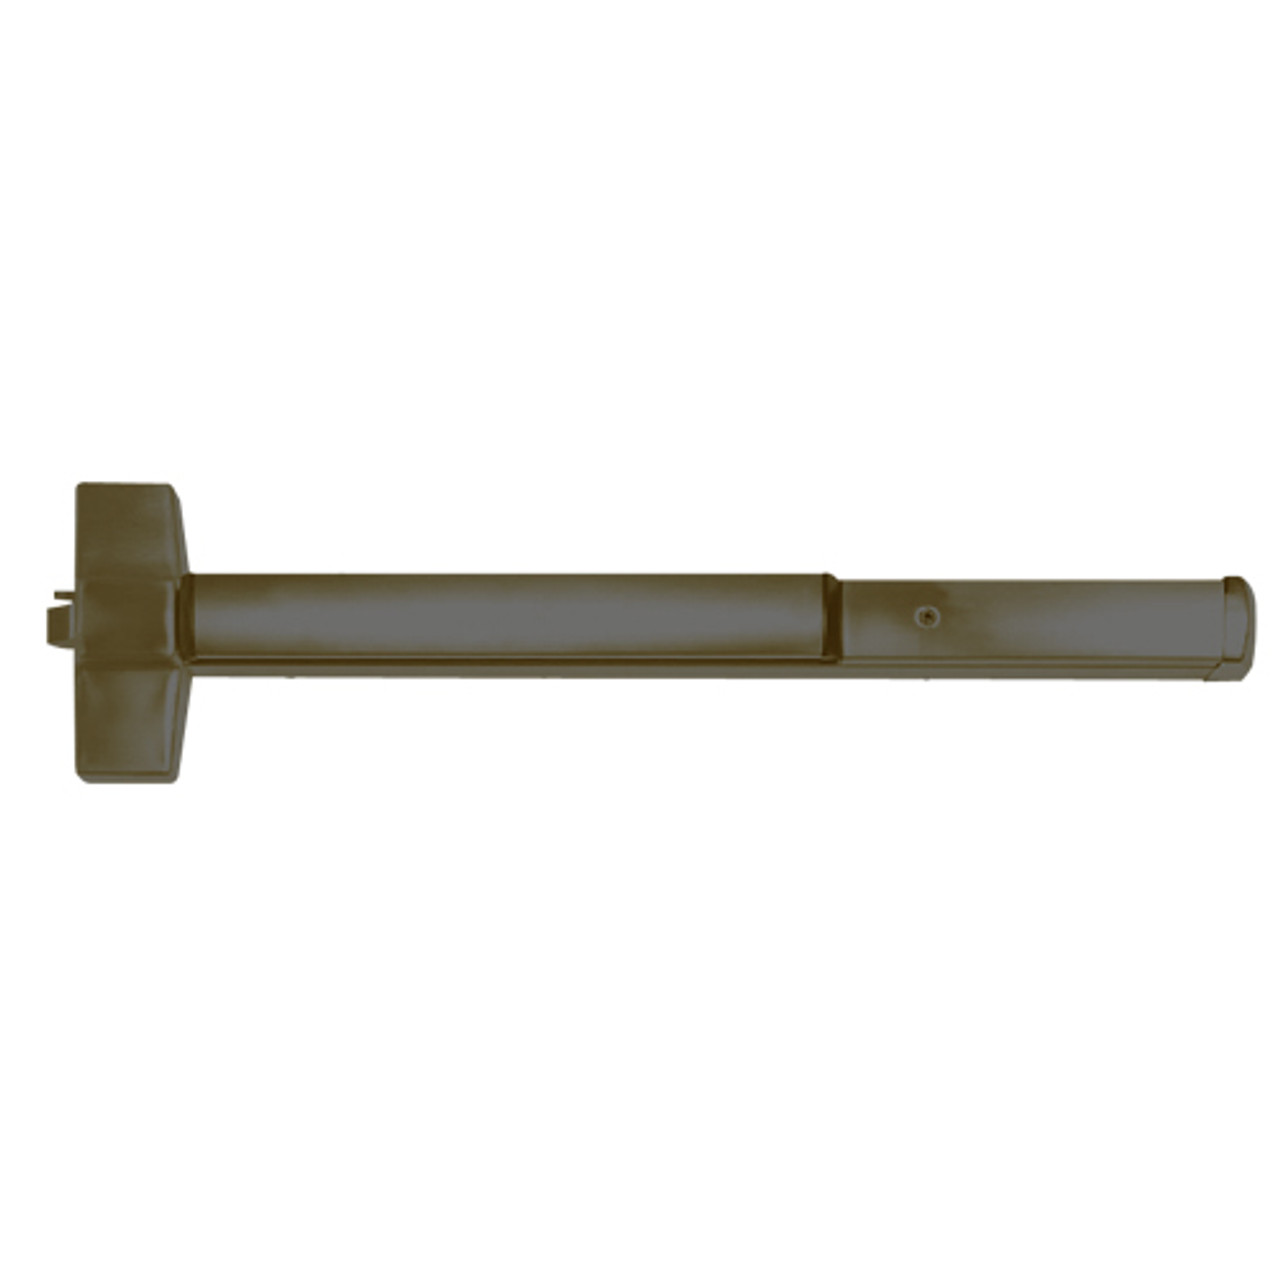 ED5200-613-W048-M92 Corbin ED5200 Series Non Fire Rated Exit Device with Touchbar Monitoring in Oil Rubbed Bronze Finish